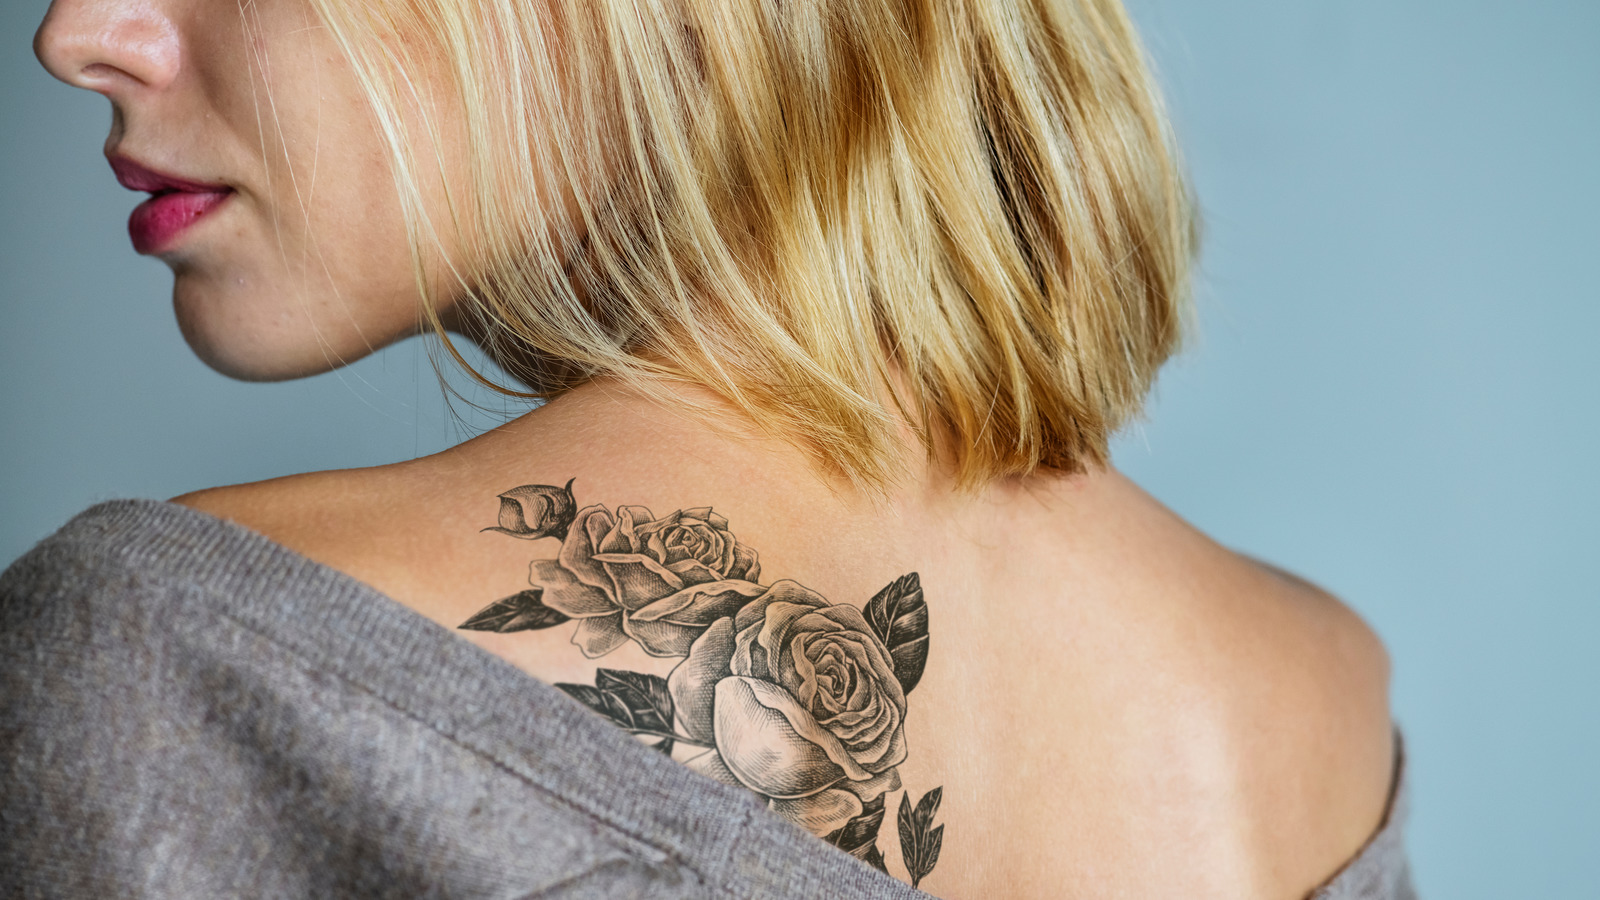 Here's Why Your Tattoos Are Getting Itchy (& How To Stop It)